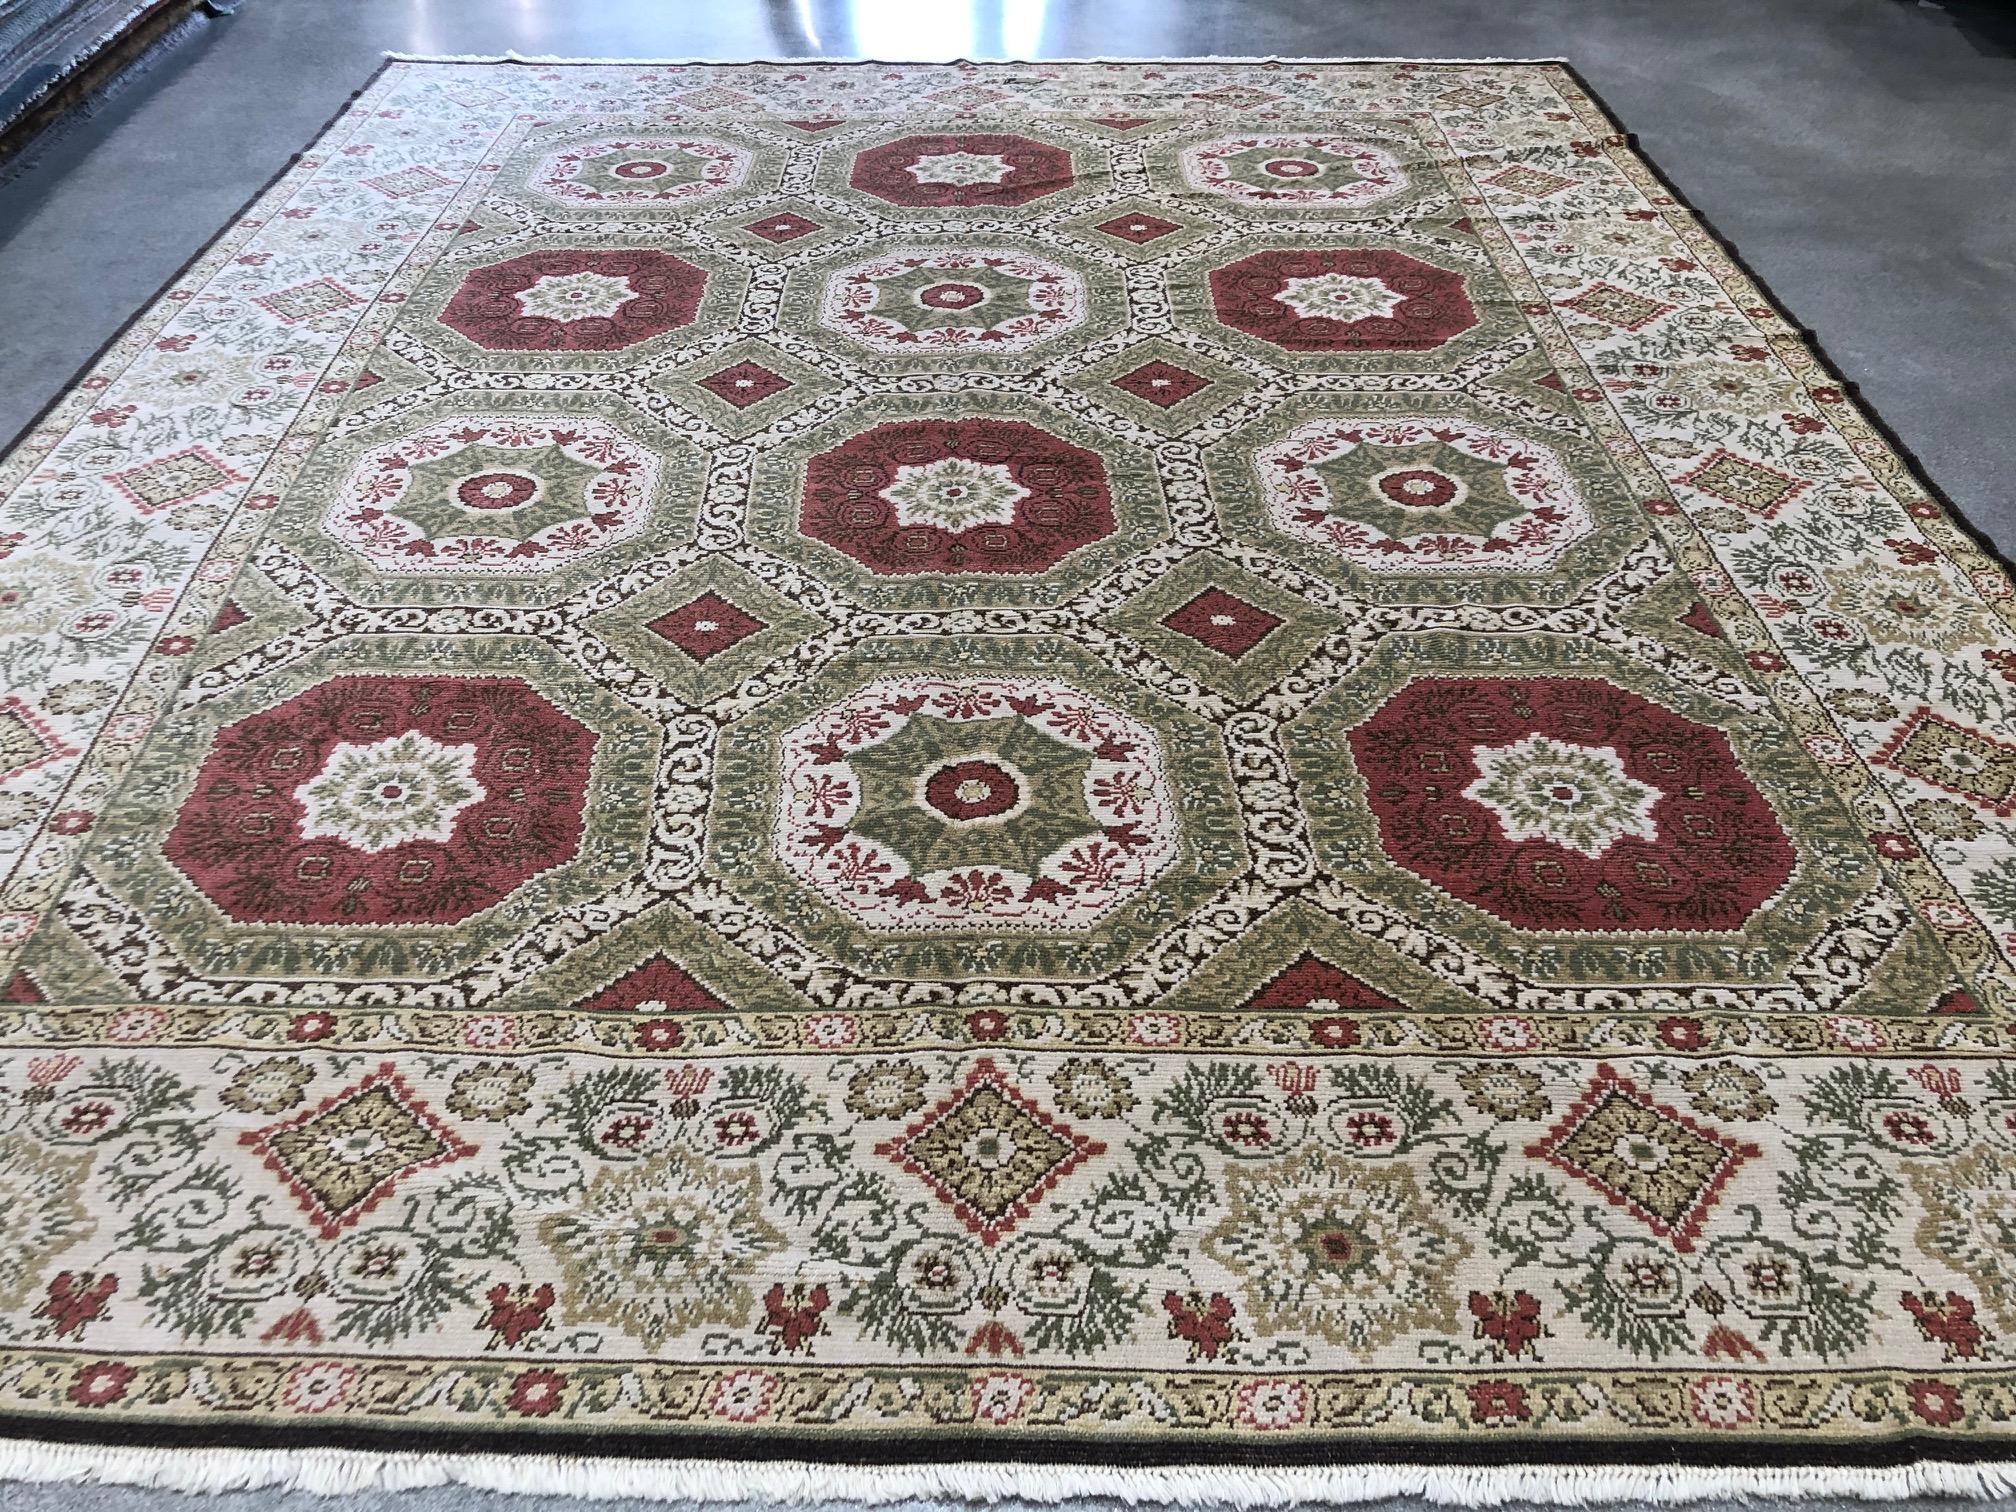 Geometric shapes and a charming floral pattern combine to create an enchanting area rug with coral, beige, gold and green tones.